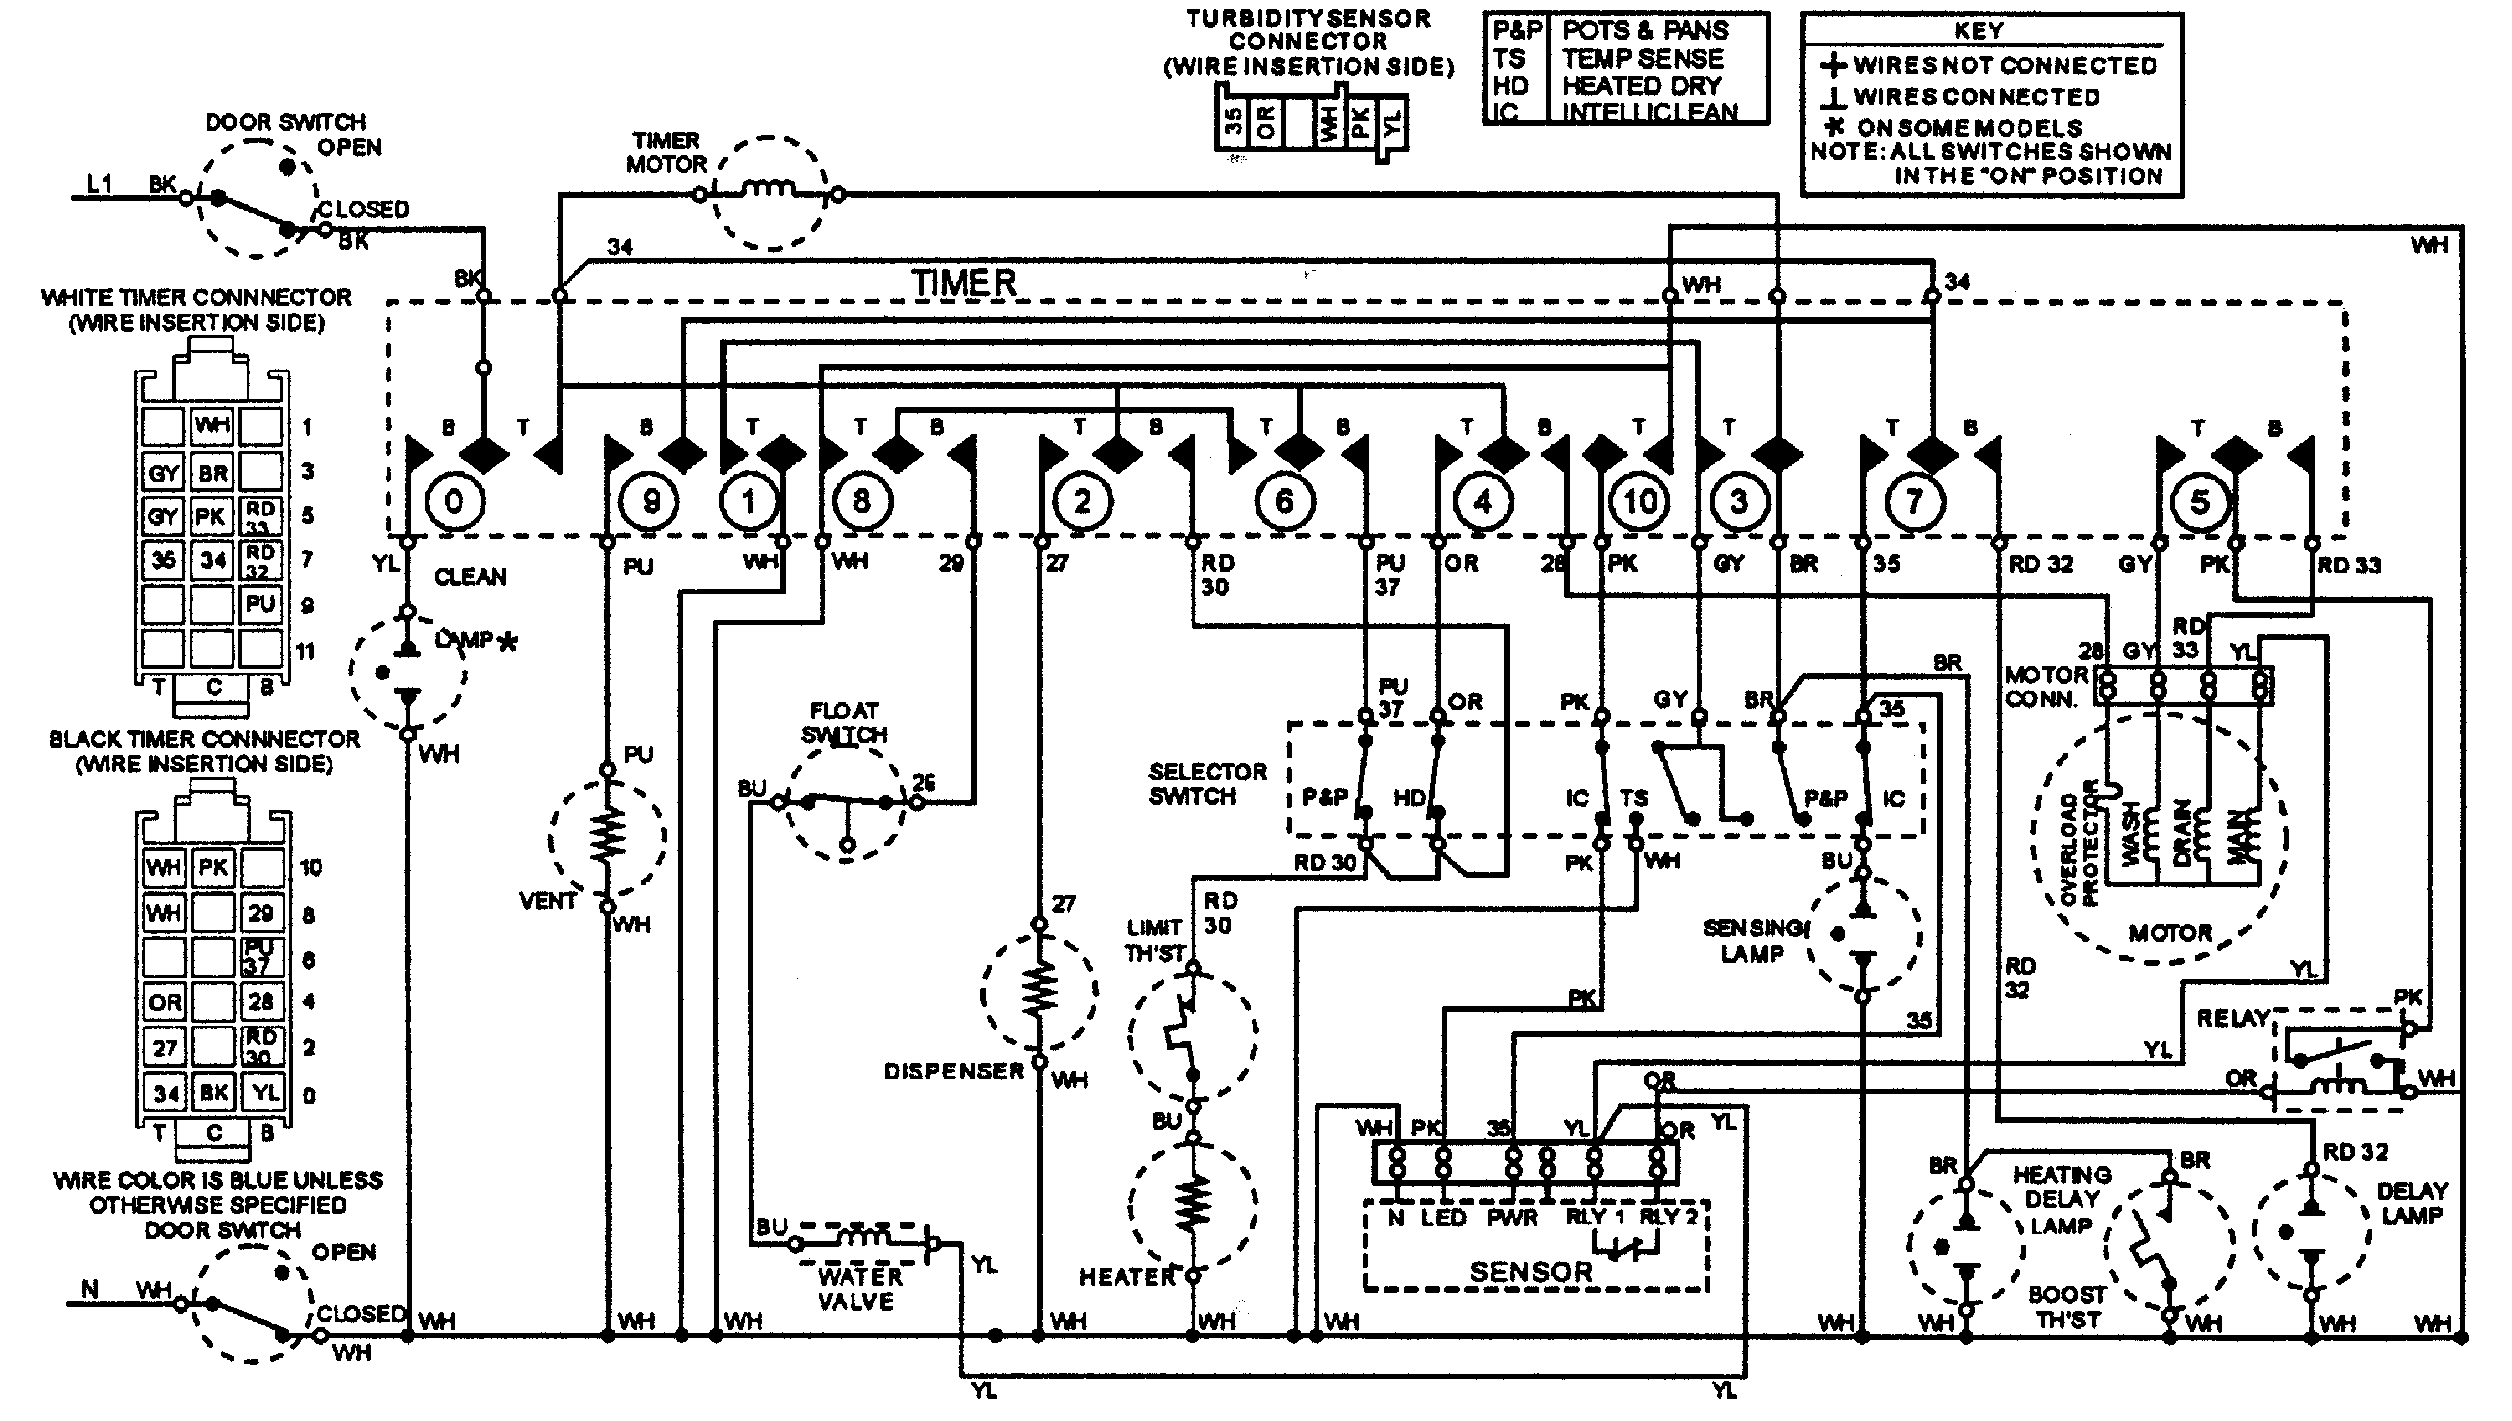 Dishwasher motors - looking for wiring diagram - DoItYourself.com